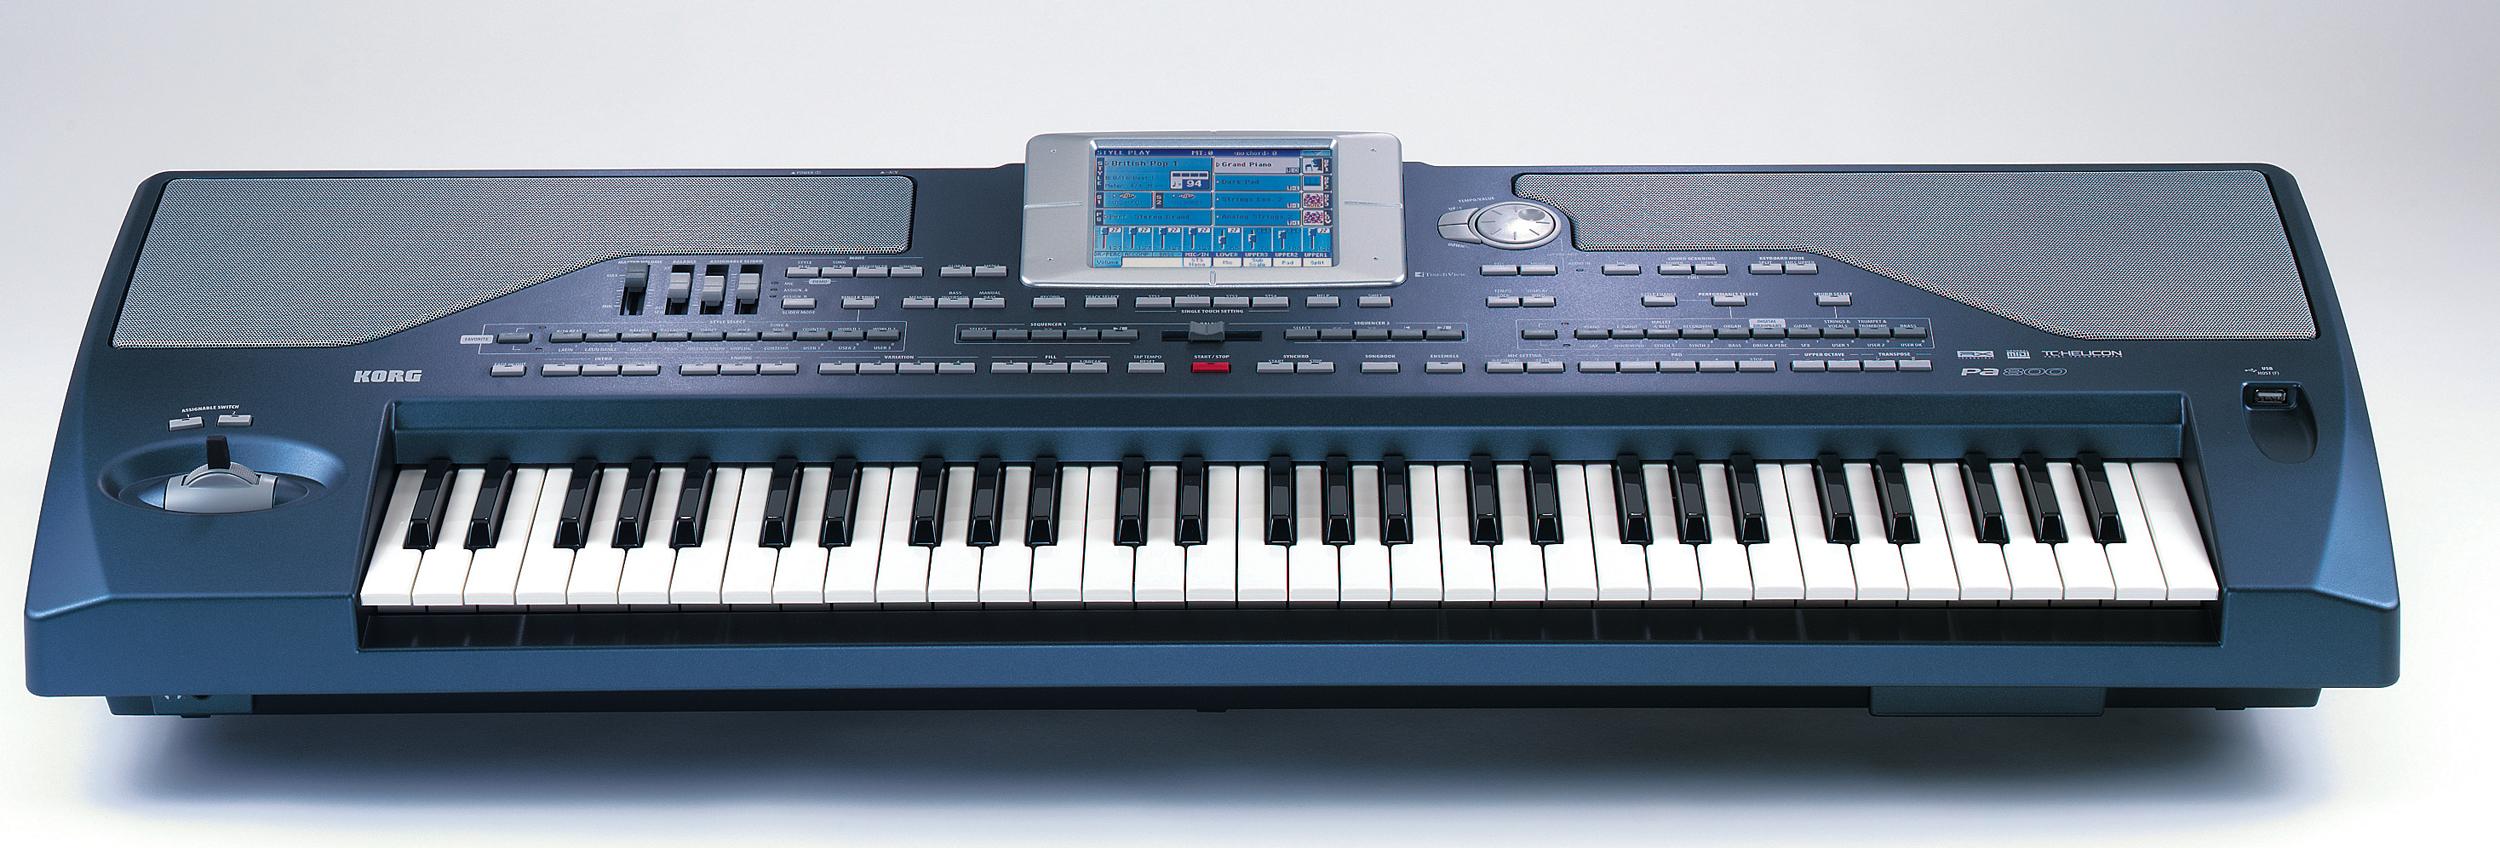 Korg pa500 specifications